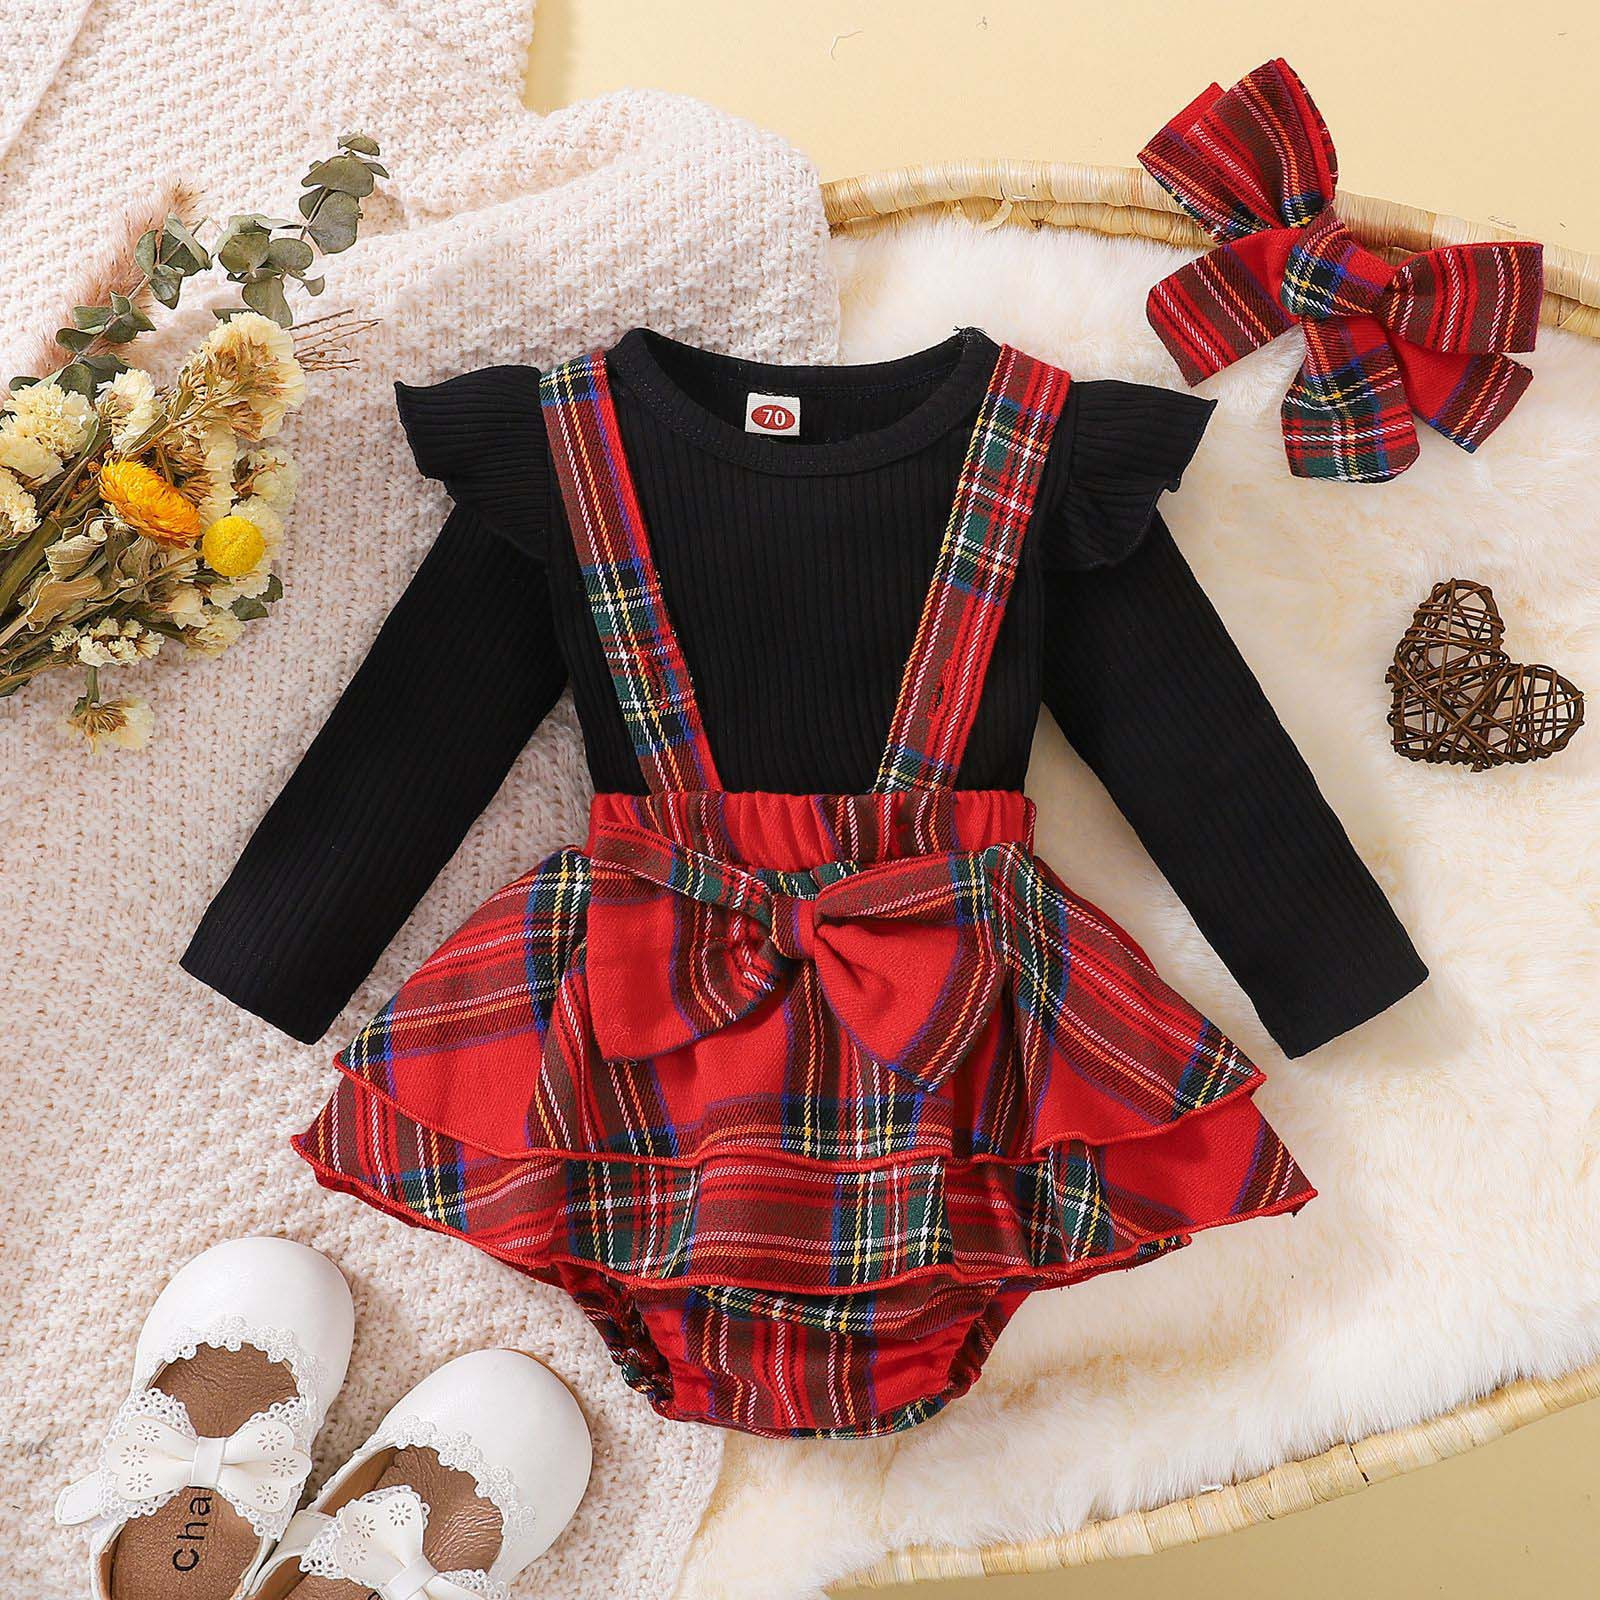 ZCFZJW Toddler Baby Girl Outfits Ruffle Long Sleeve Ribbed Sweatshirt Shirt Top Buffalo Plaid Suspender Overall Skirt Headband Butterfly Knot Hairband 3 Pieces Set(Black,9-12 Months) - image 2 of 9